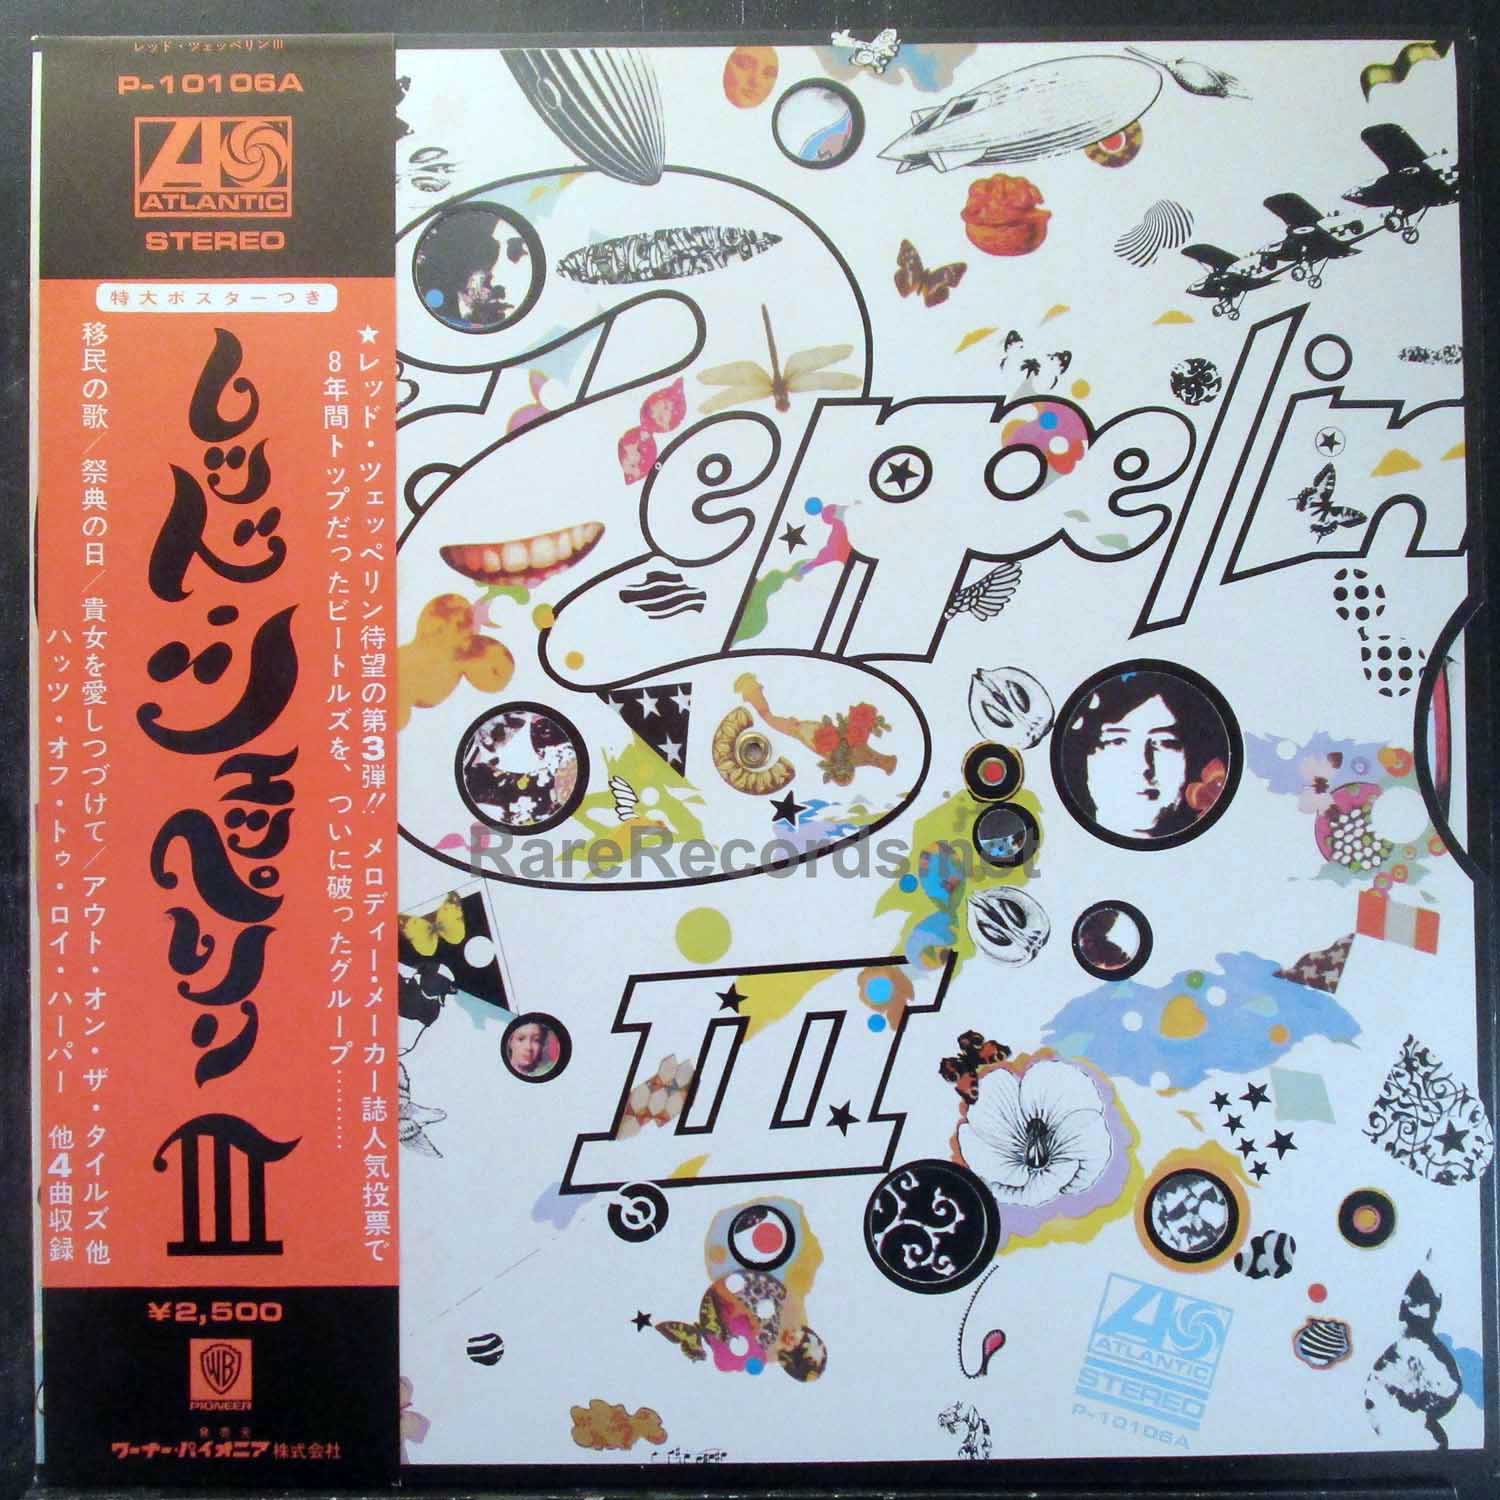 Led Zeppelin – Led Zeppelin III 1976 Japan LP with poster and obi